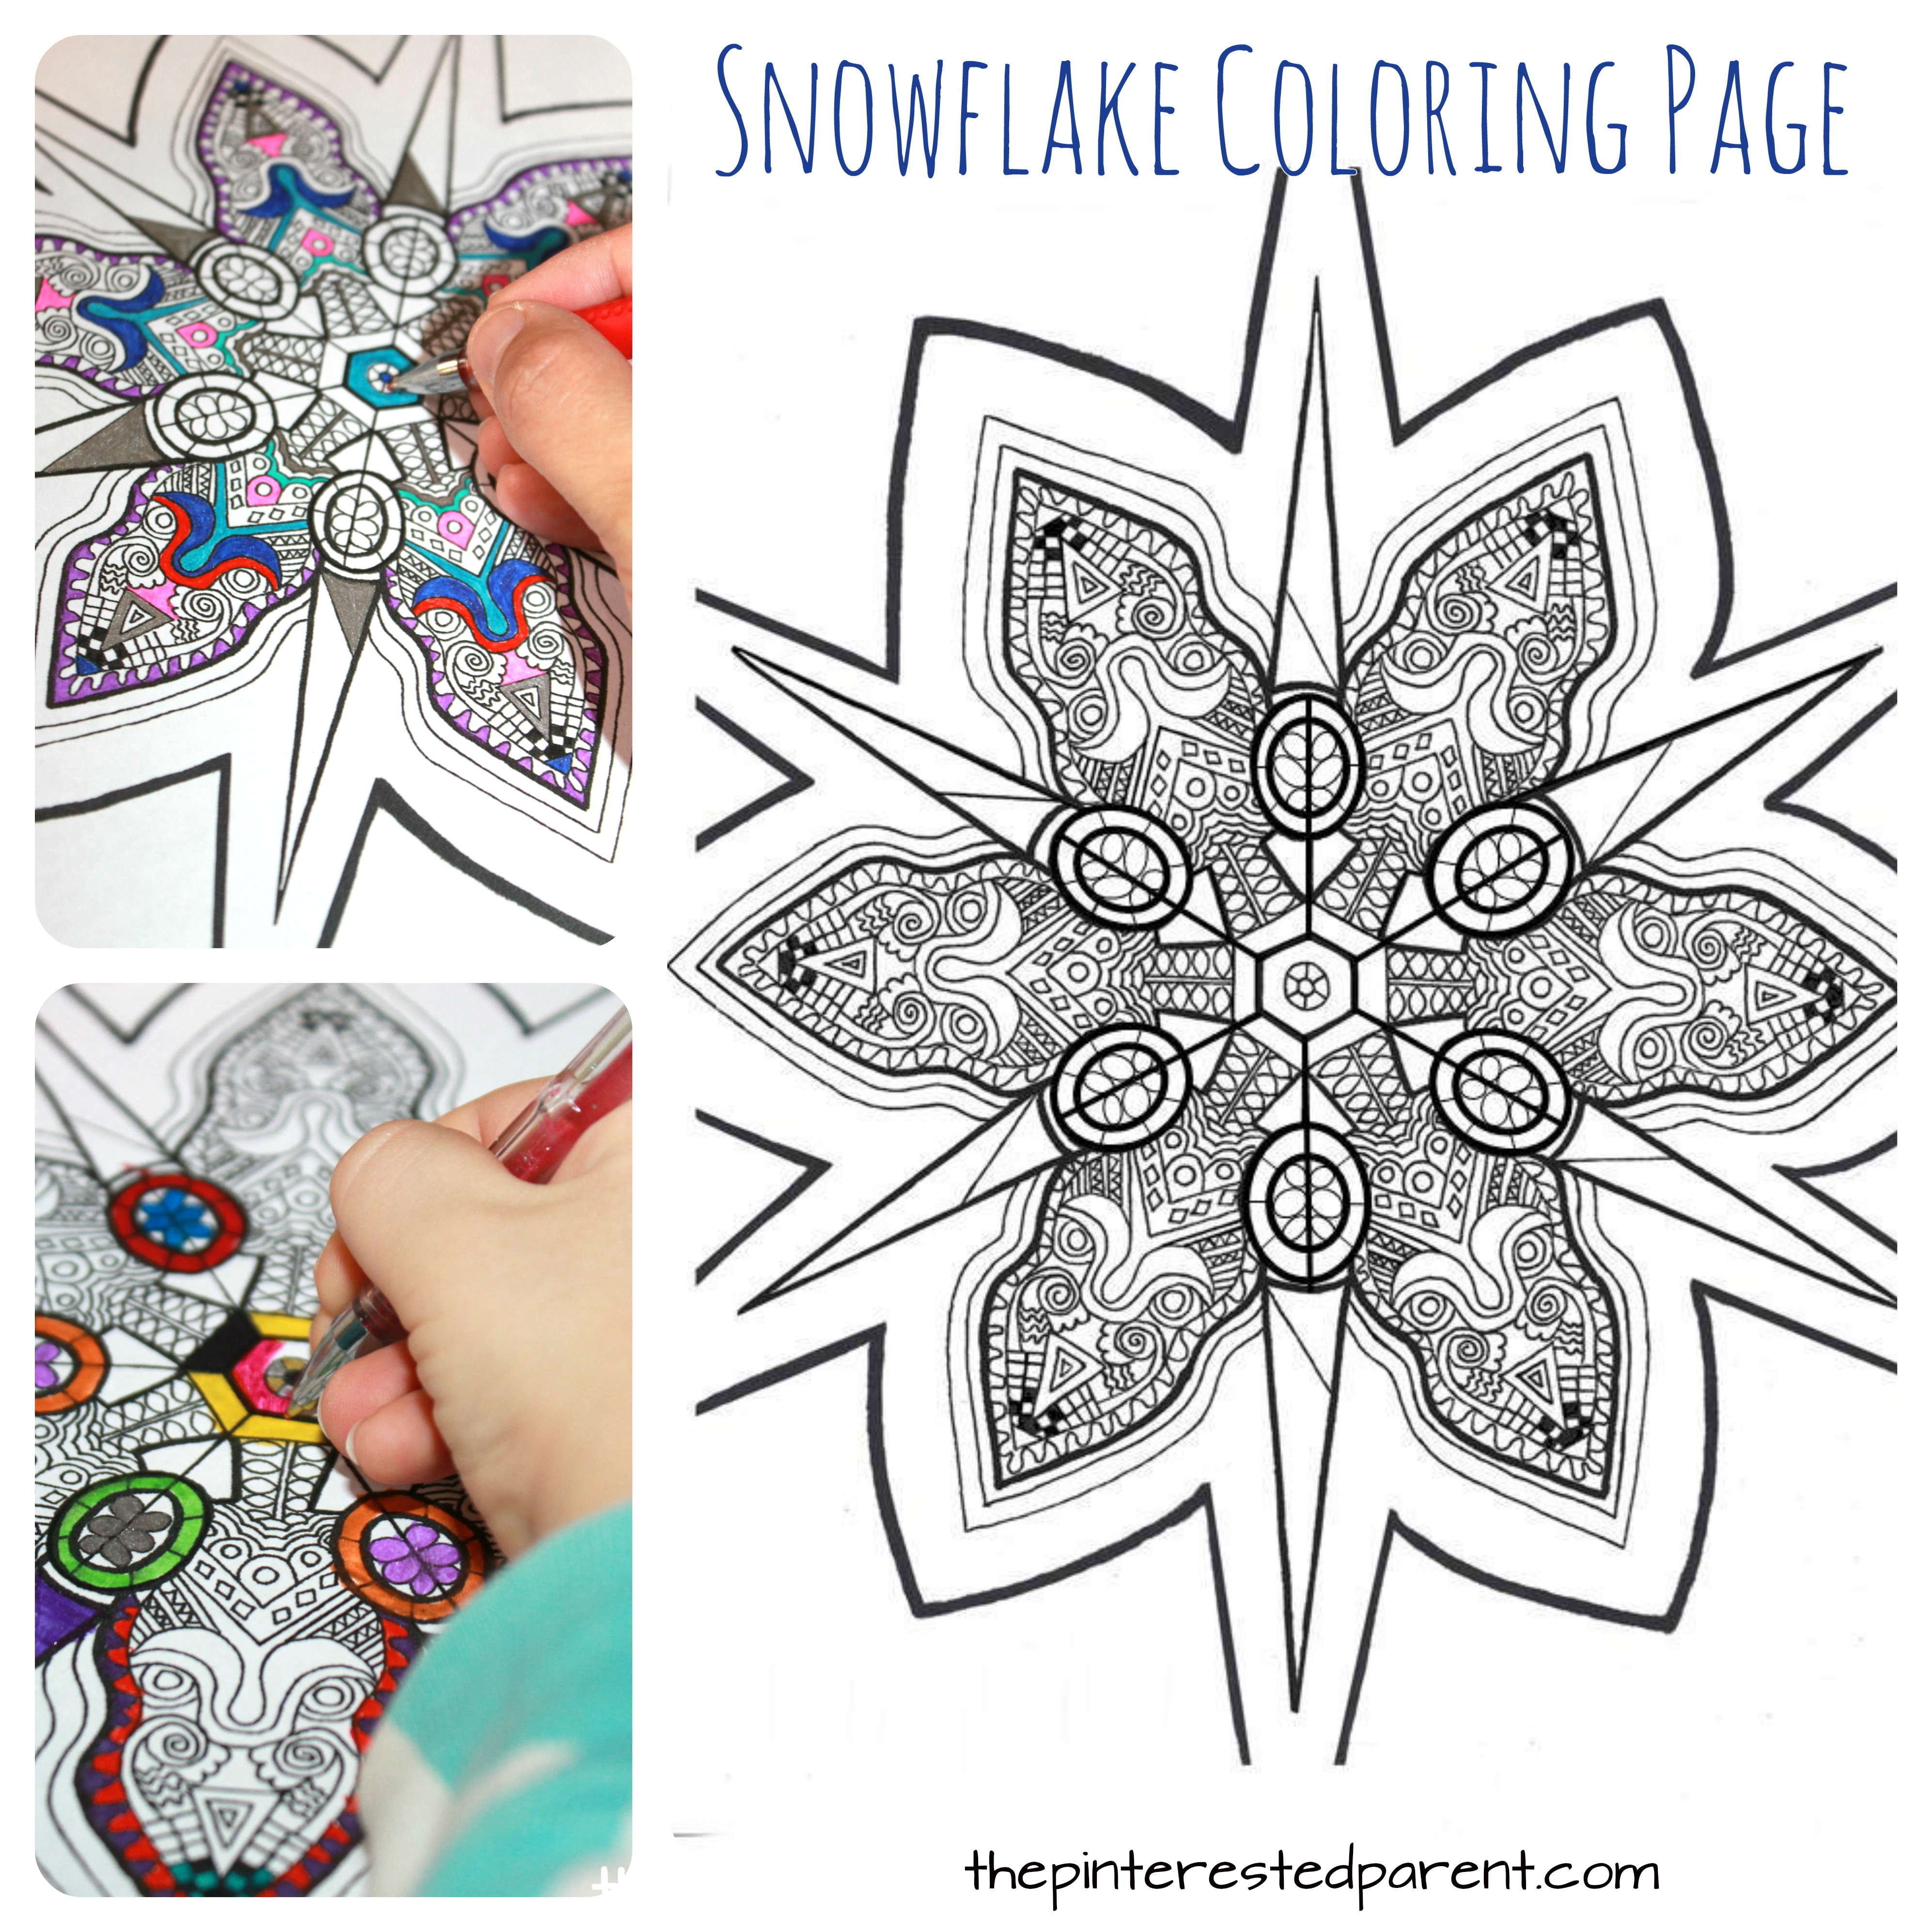 Printable snowflake coloring page - winter coloring for kids or adults